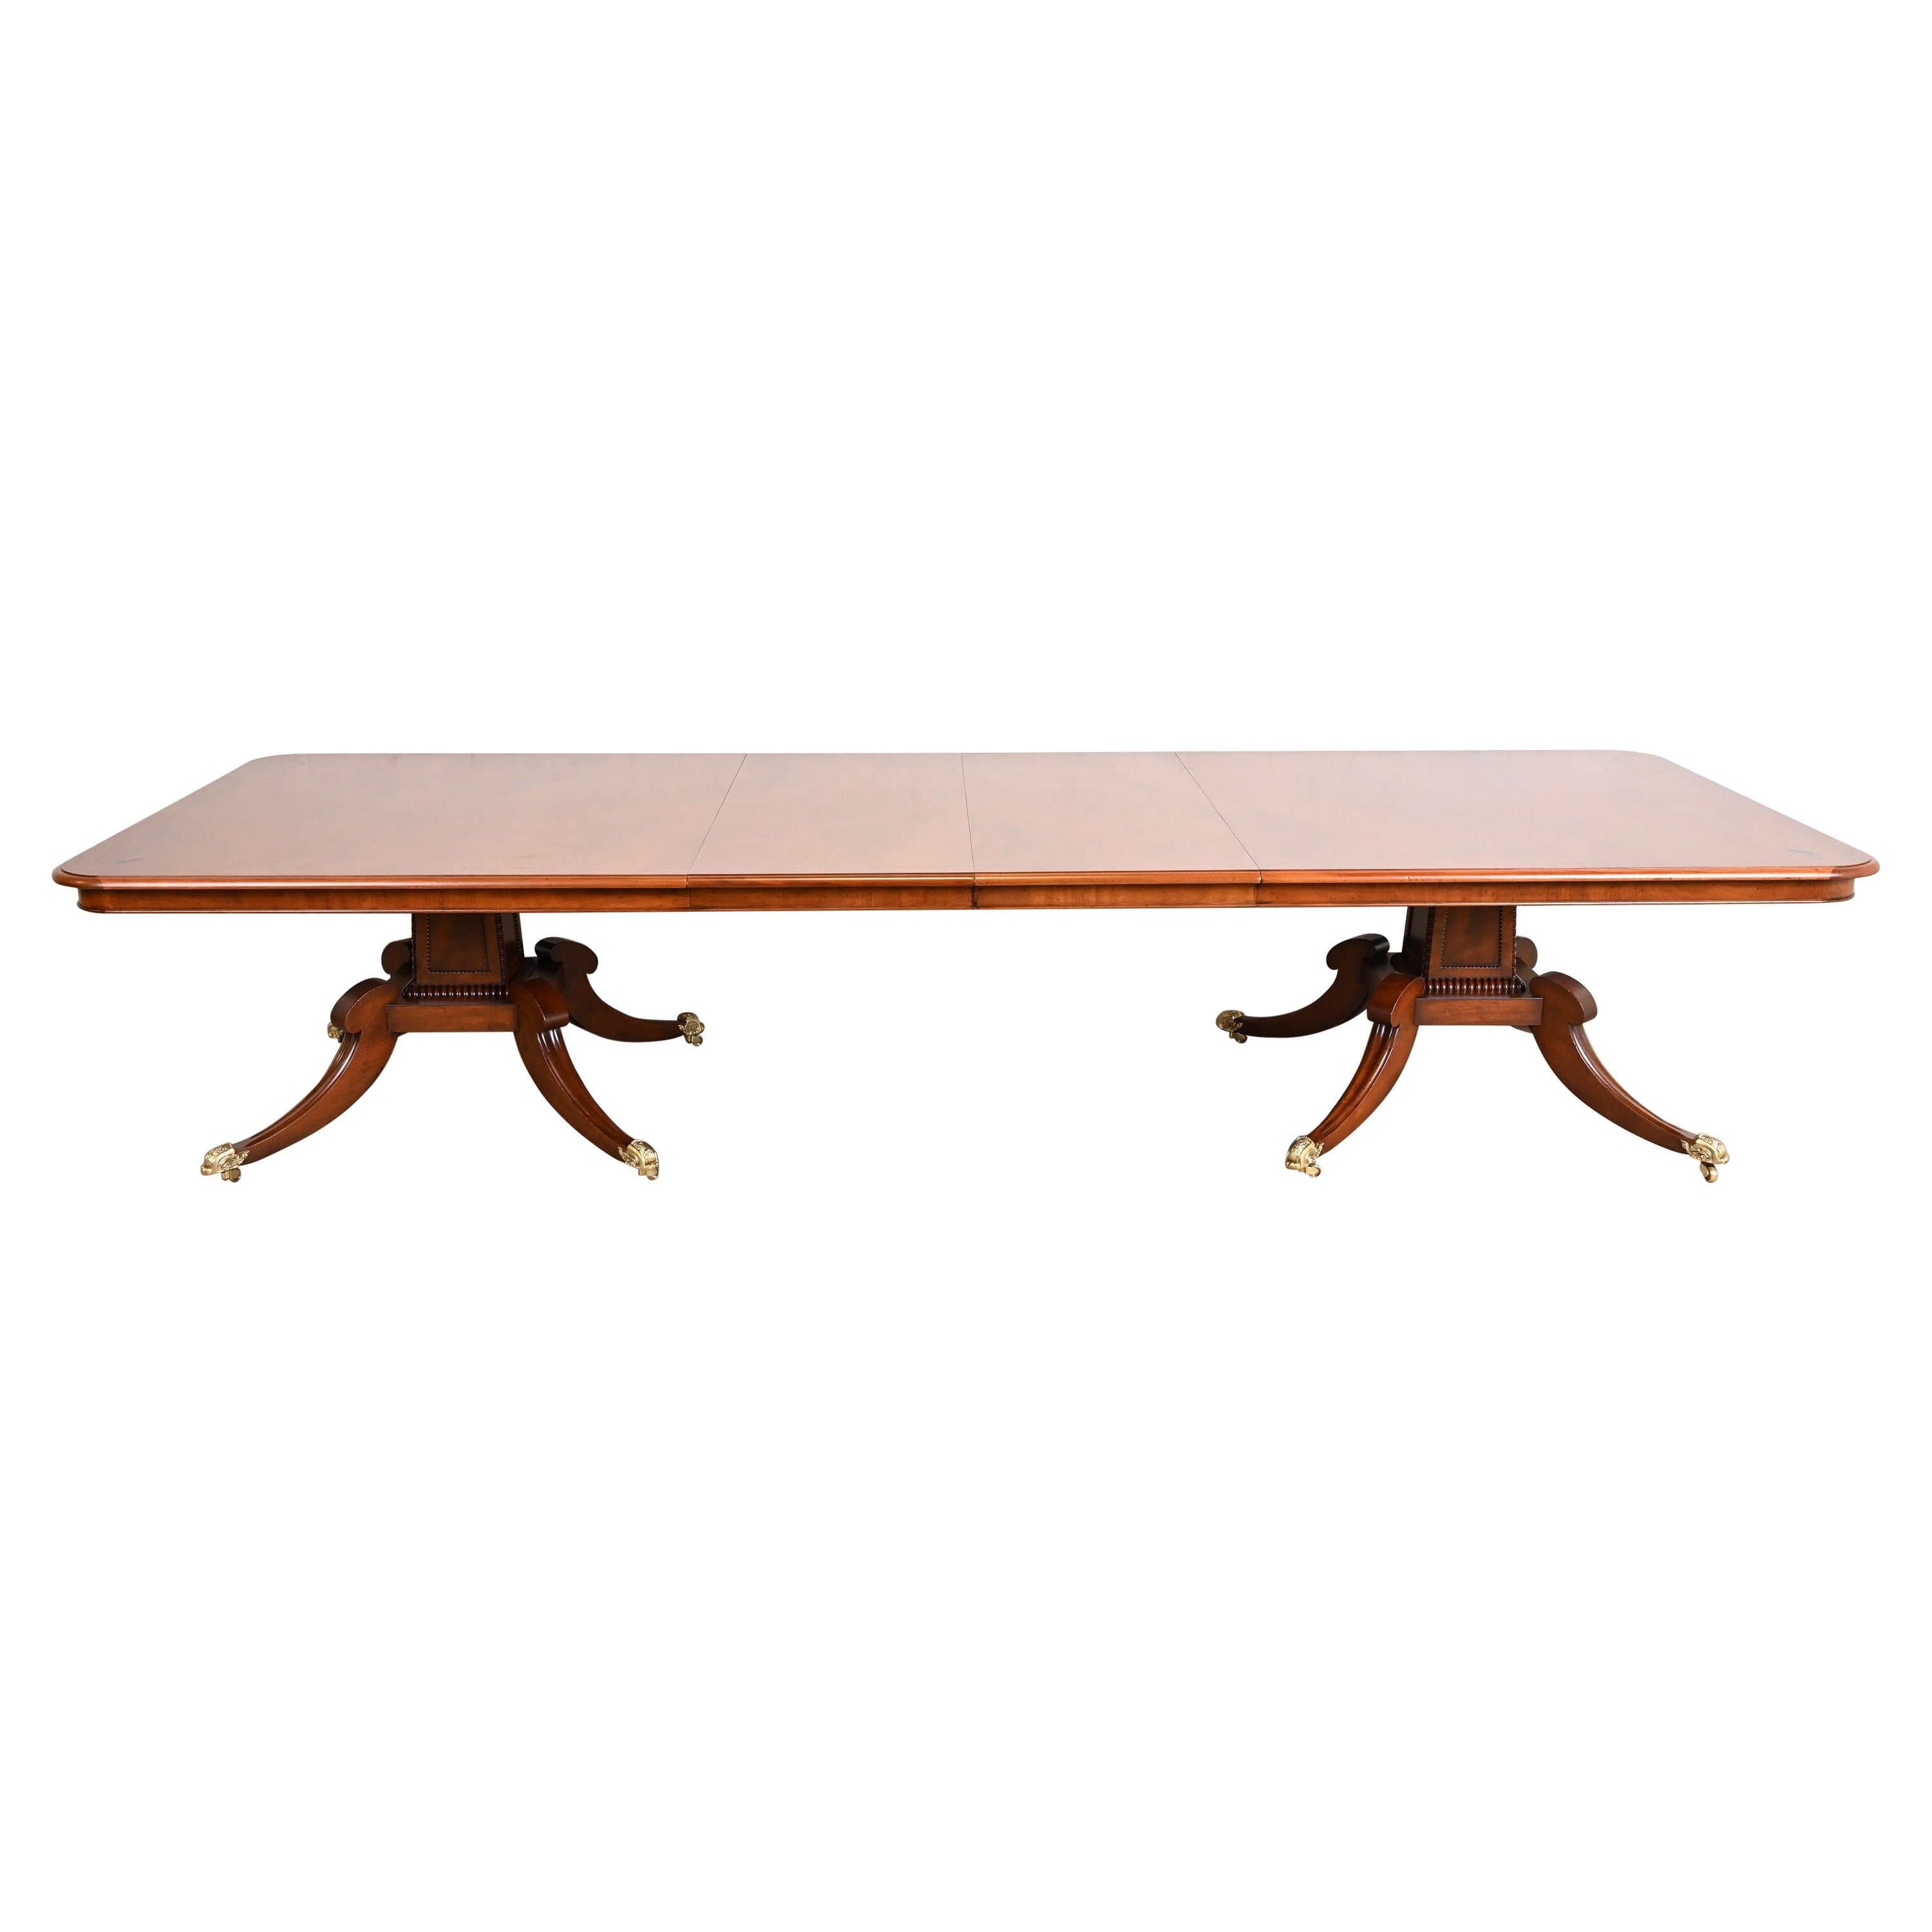 English Georgian Double Pedestal Dining Table by Restall Brown & Clennell For Sale